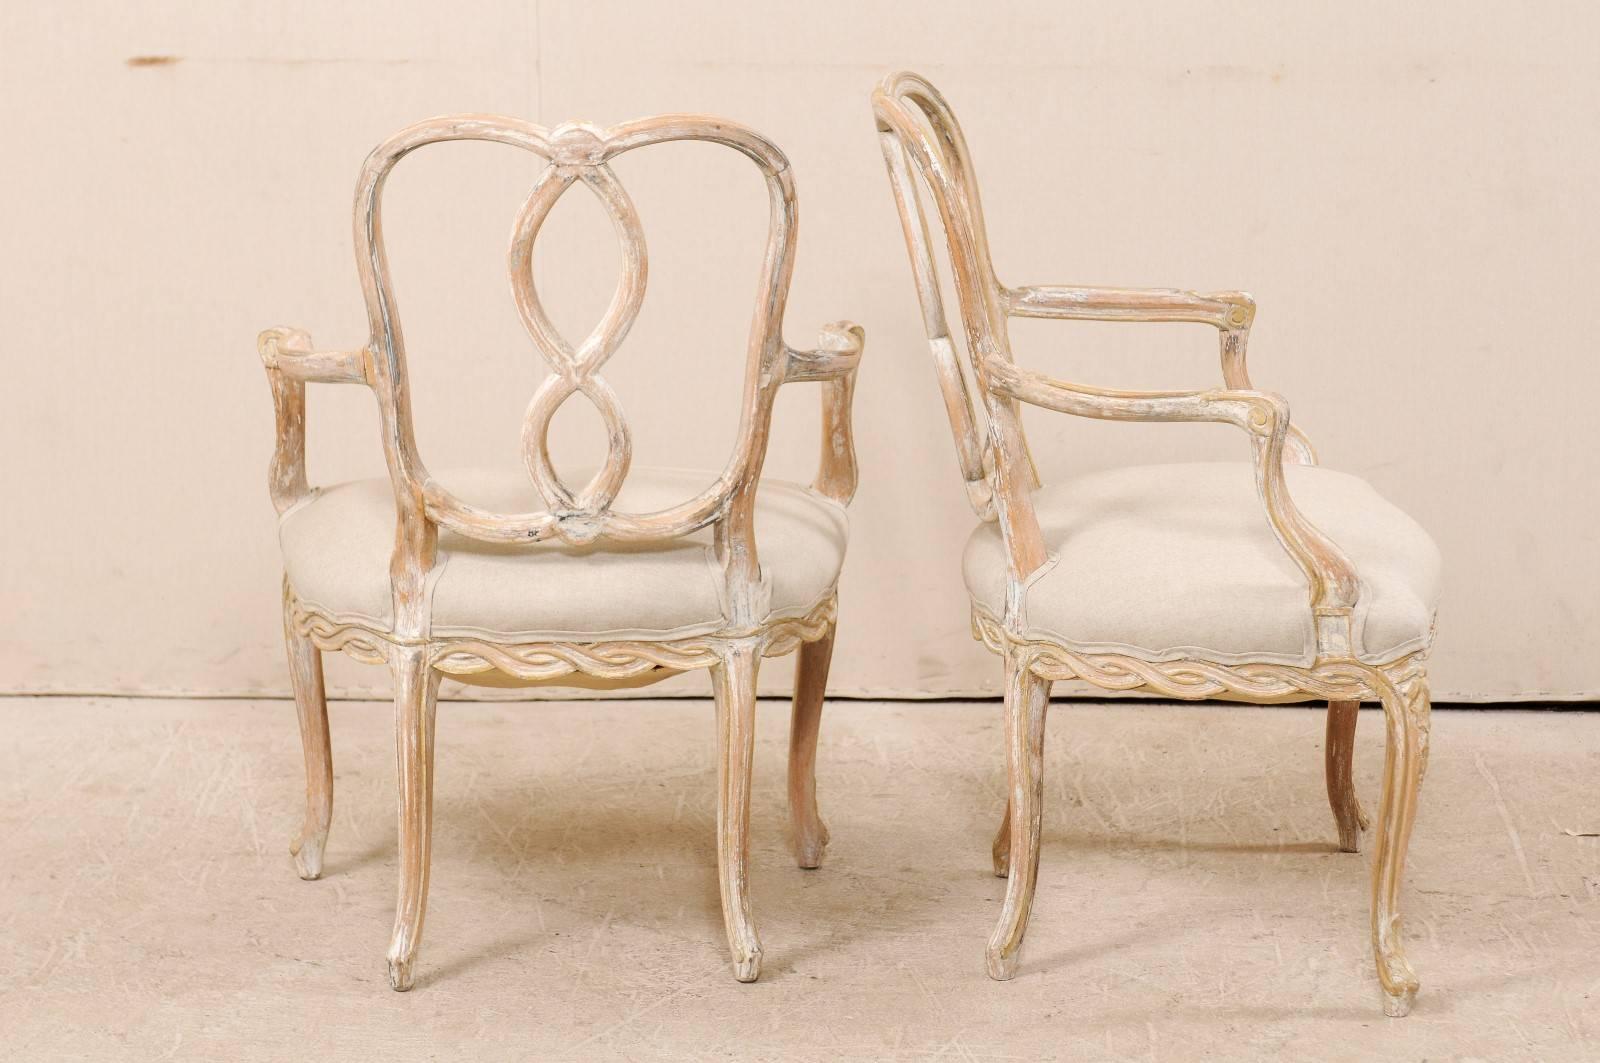 Carved Pair of Venetian Style Ribbon Back Chairs with Cabriole Legs in Nice Light Tones